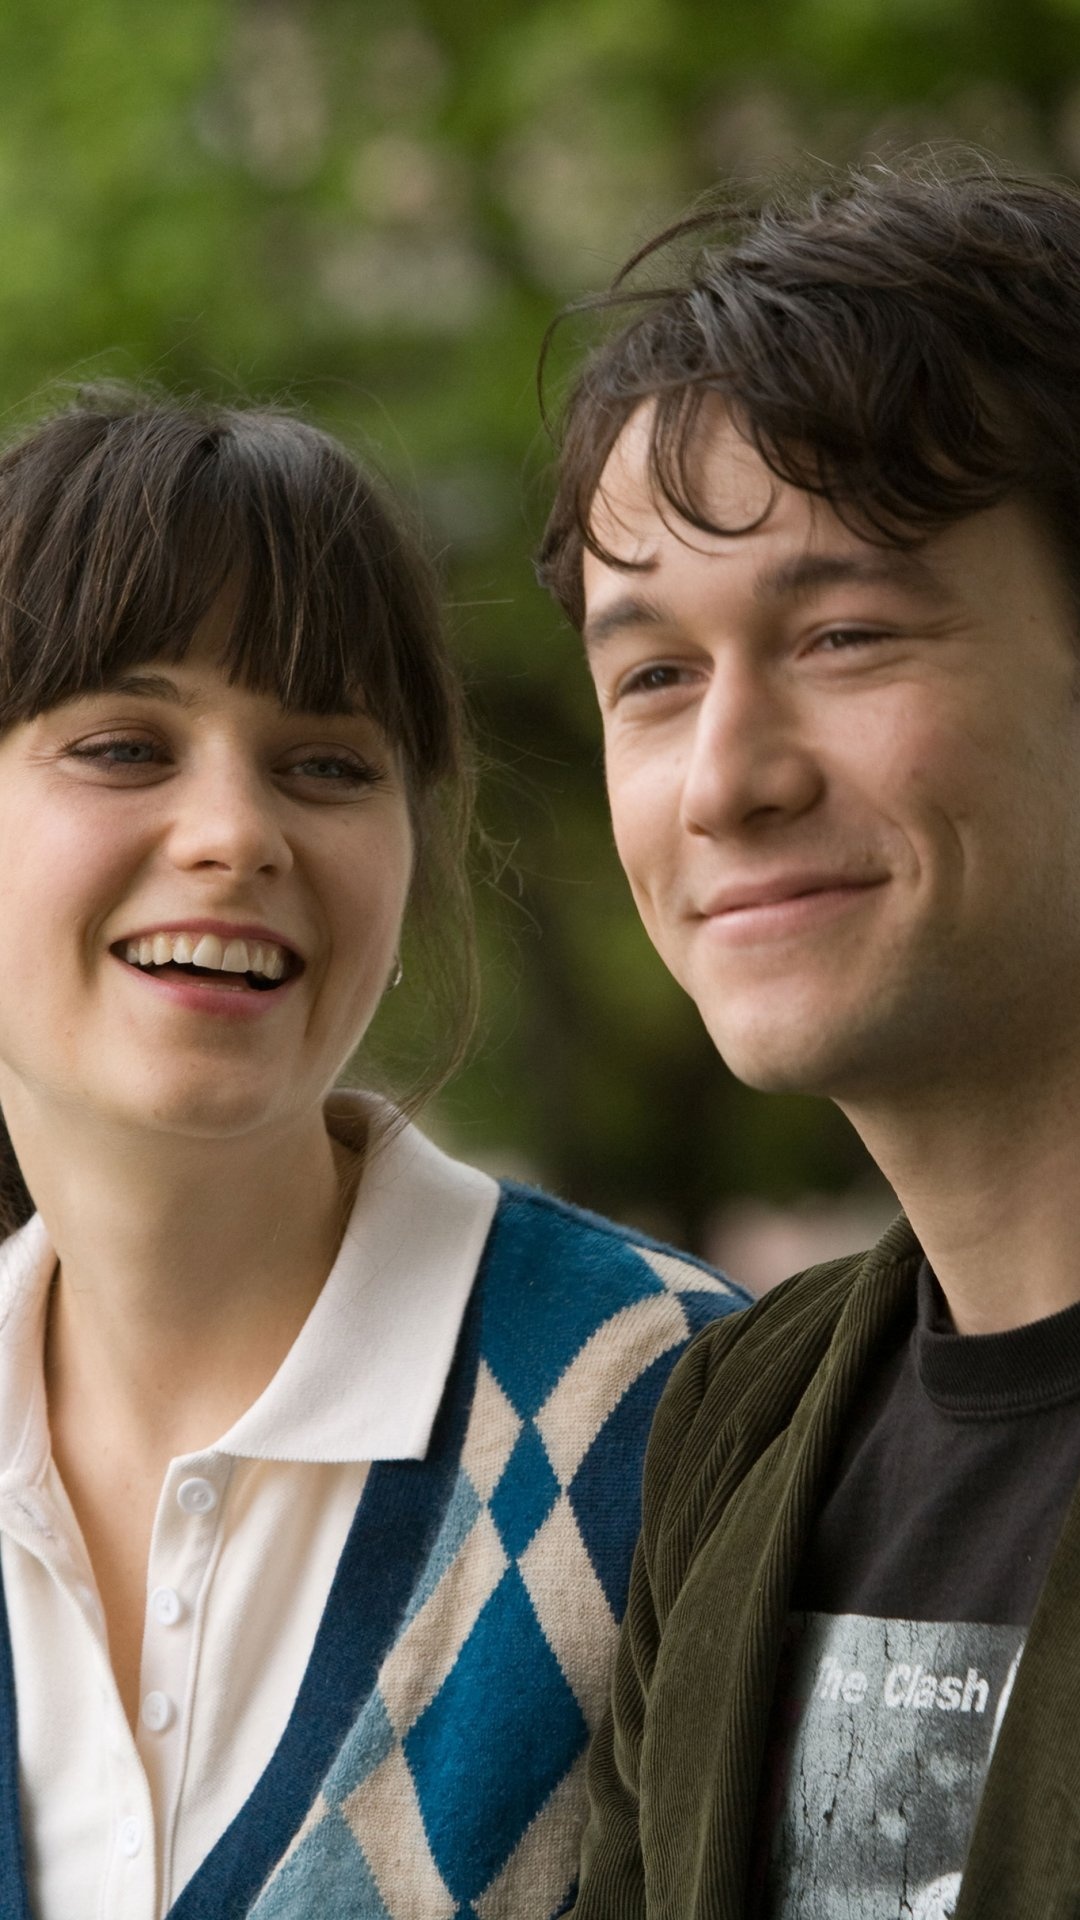 (500) Days of Summer: A film with a nonlinear narrative, The period of Tom and Summer's relationship. 1080x1920 Full HD Wallpaper.